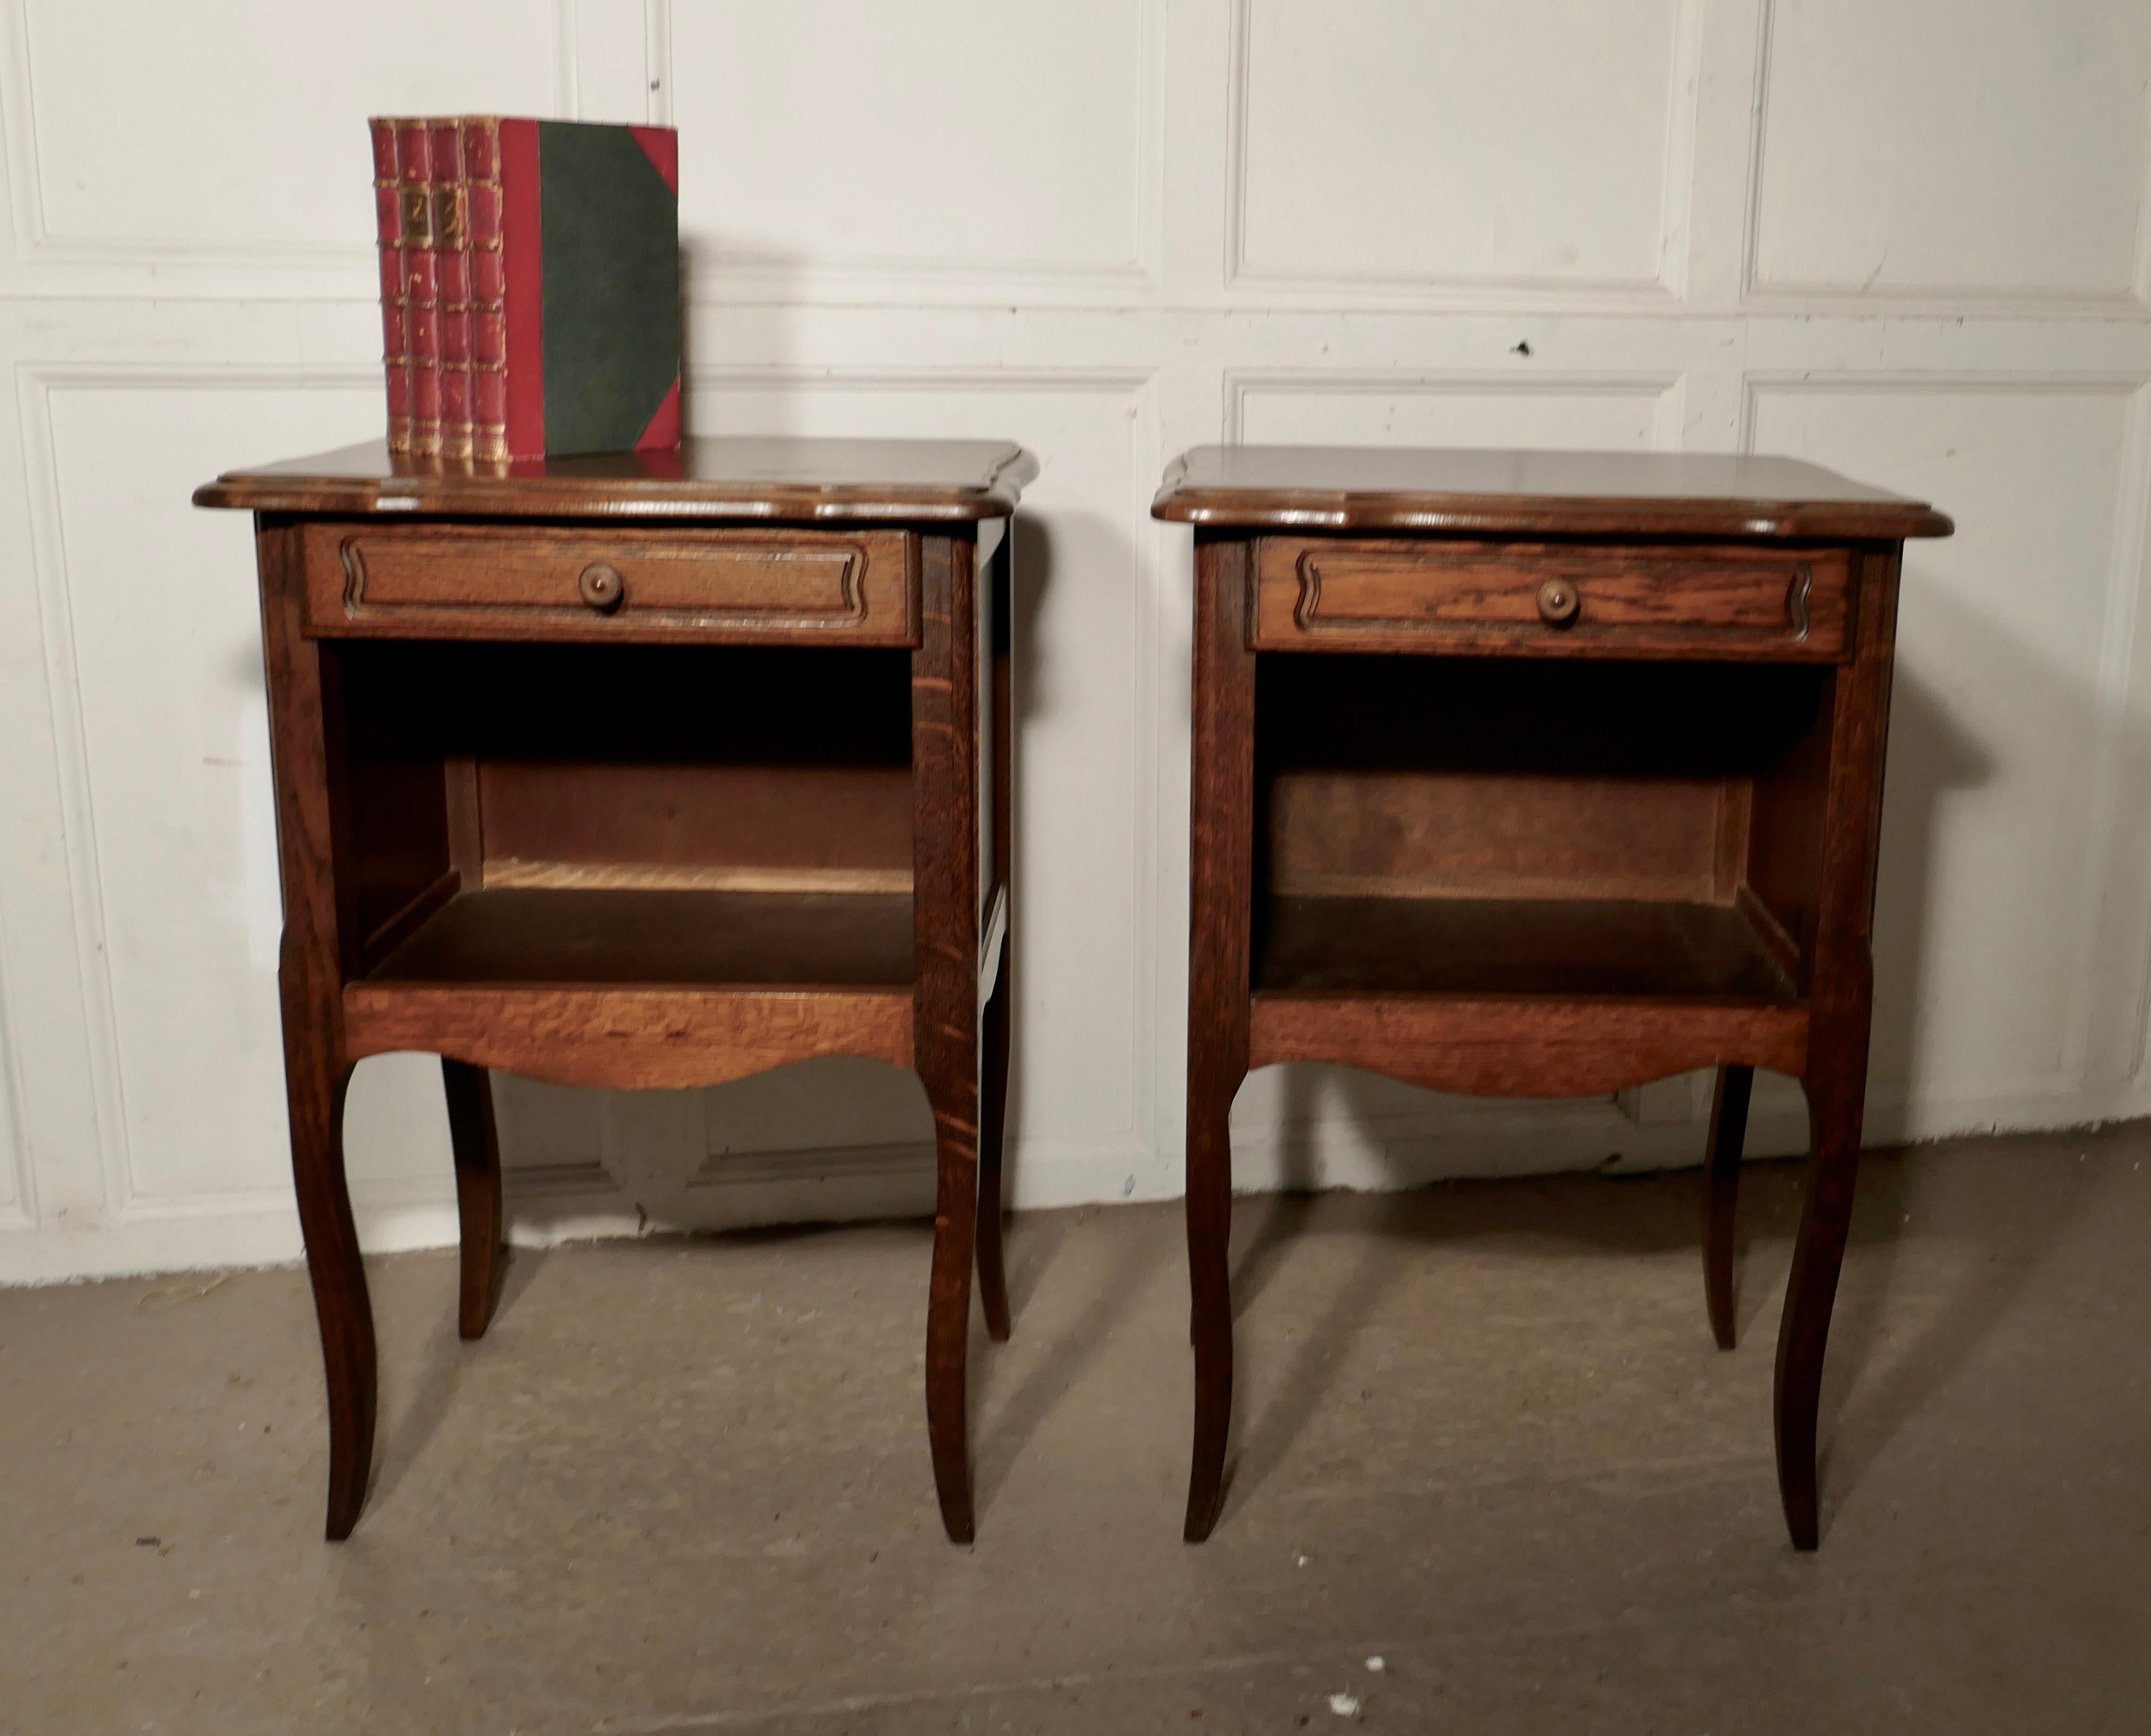 Pair of French country oak bedside cabinets 

This is a pretty pair of cabinets or chevets, they are made in oak and have a shaped top.
The cabinets have an open book shelf and a drawer, they stand on splayed legs,
The cabinets are in good